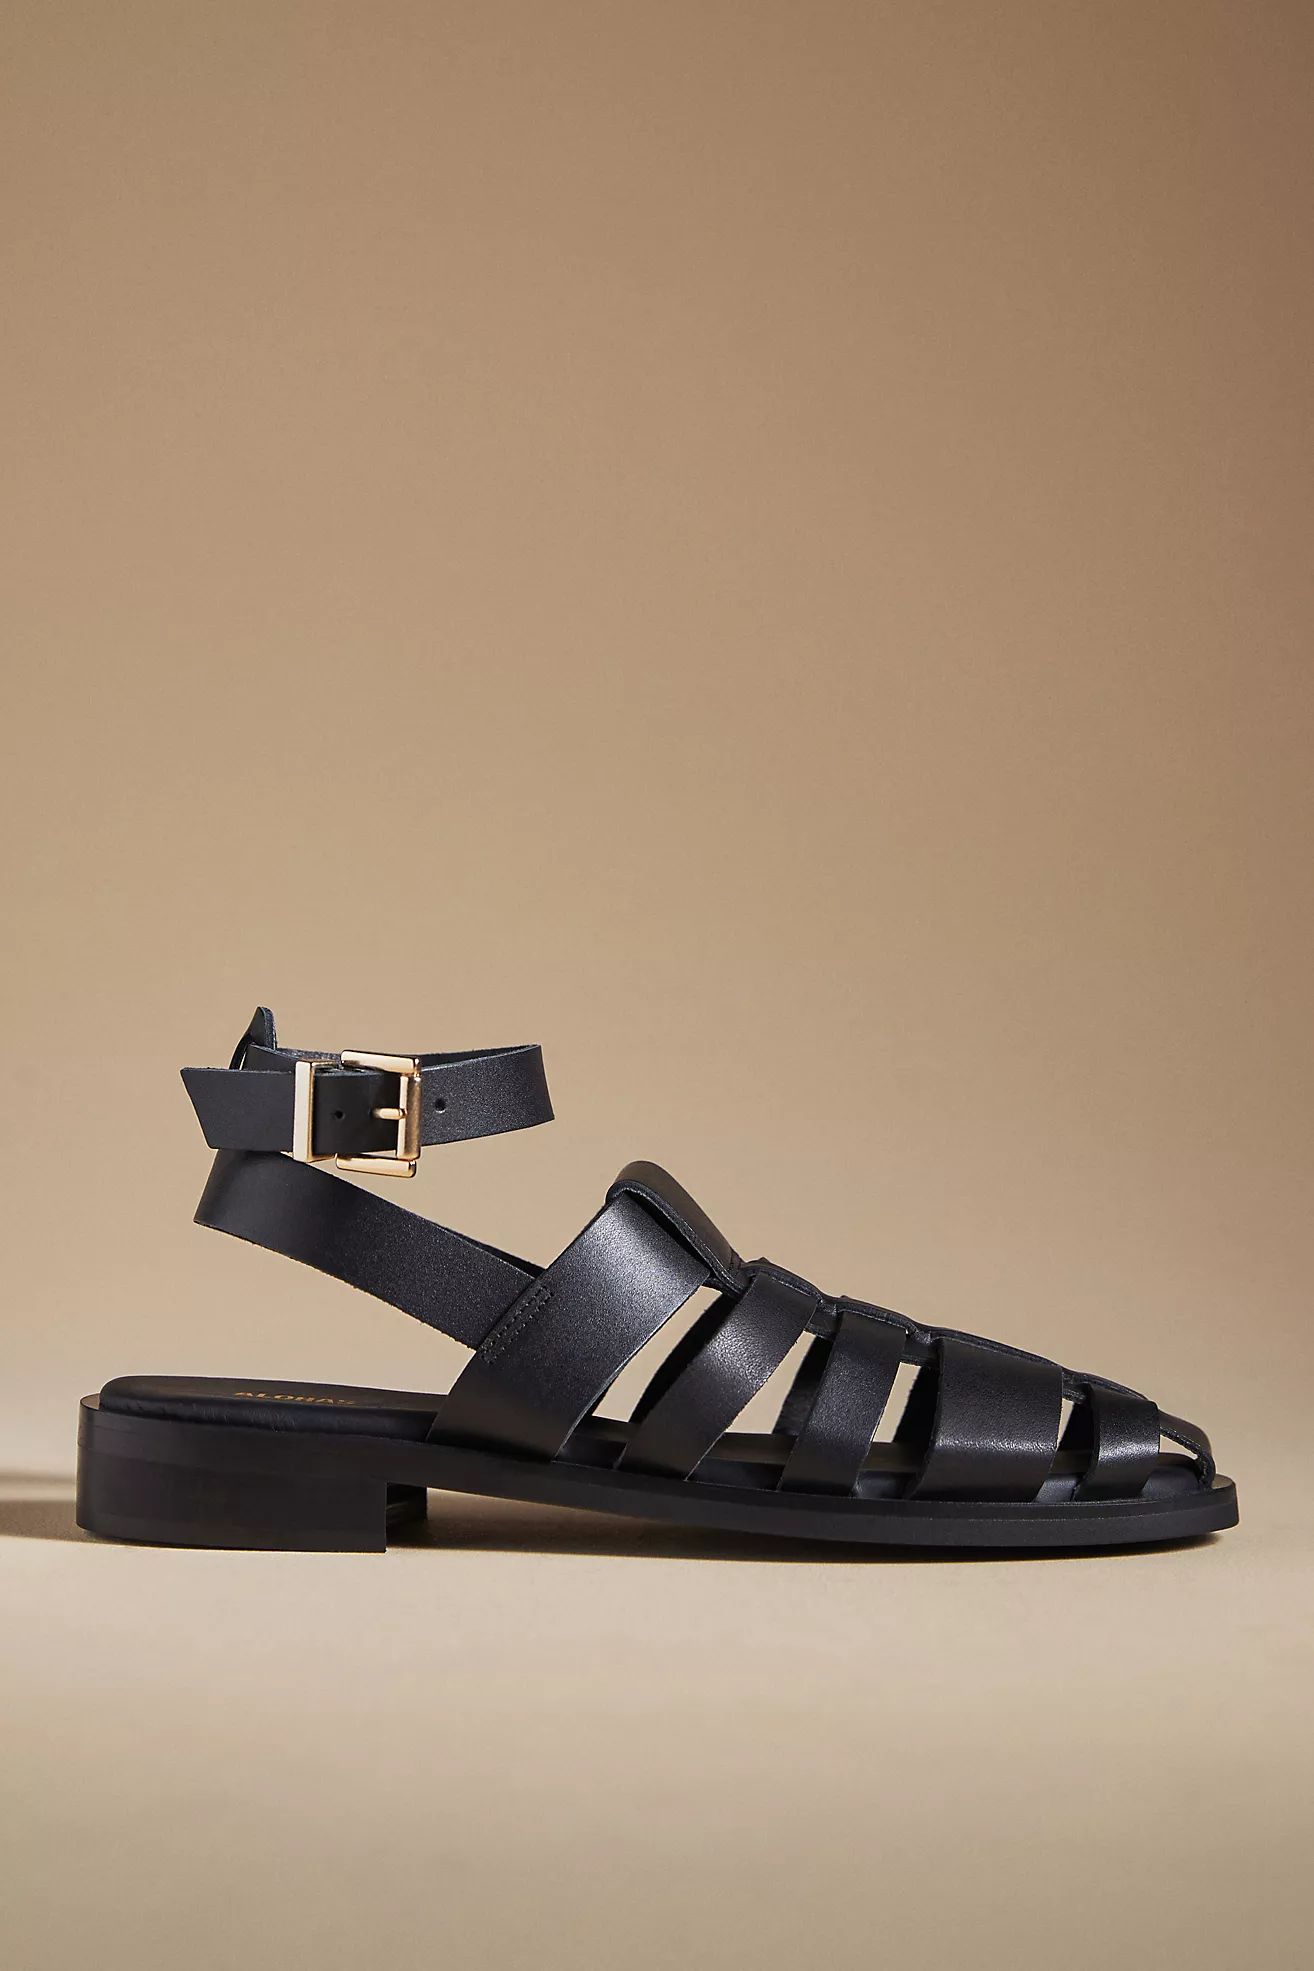 ALOHAS Perry Fisherman Sandals | Anthropologie (US)